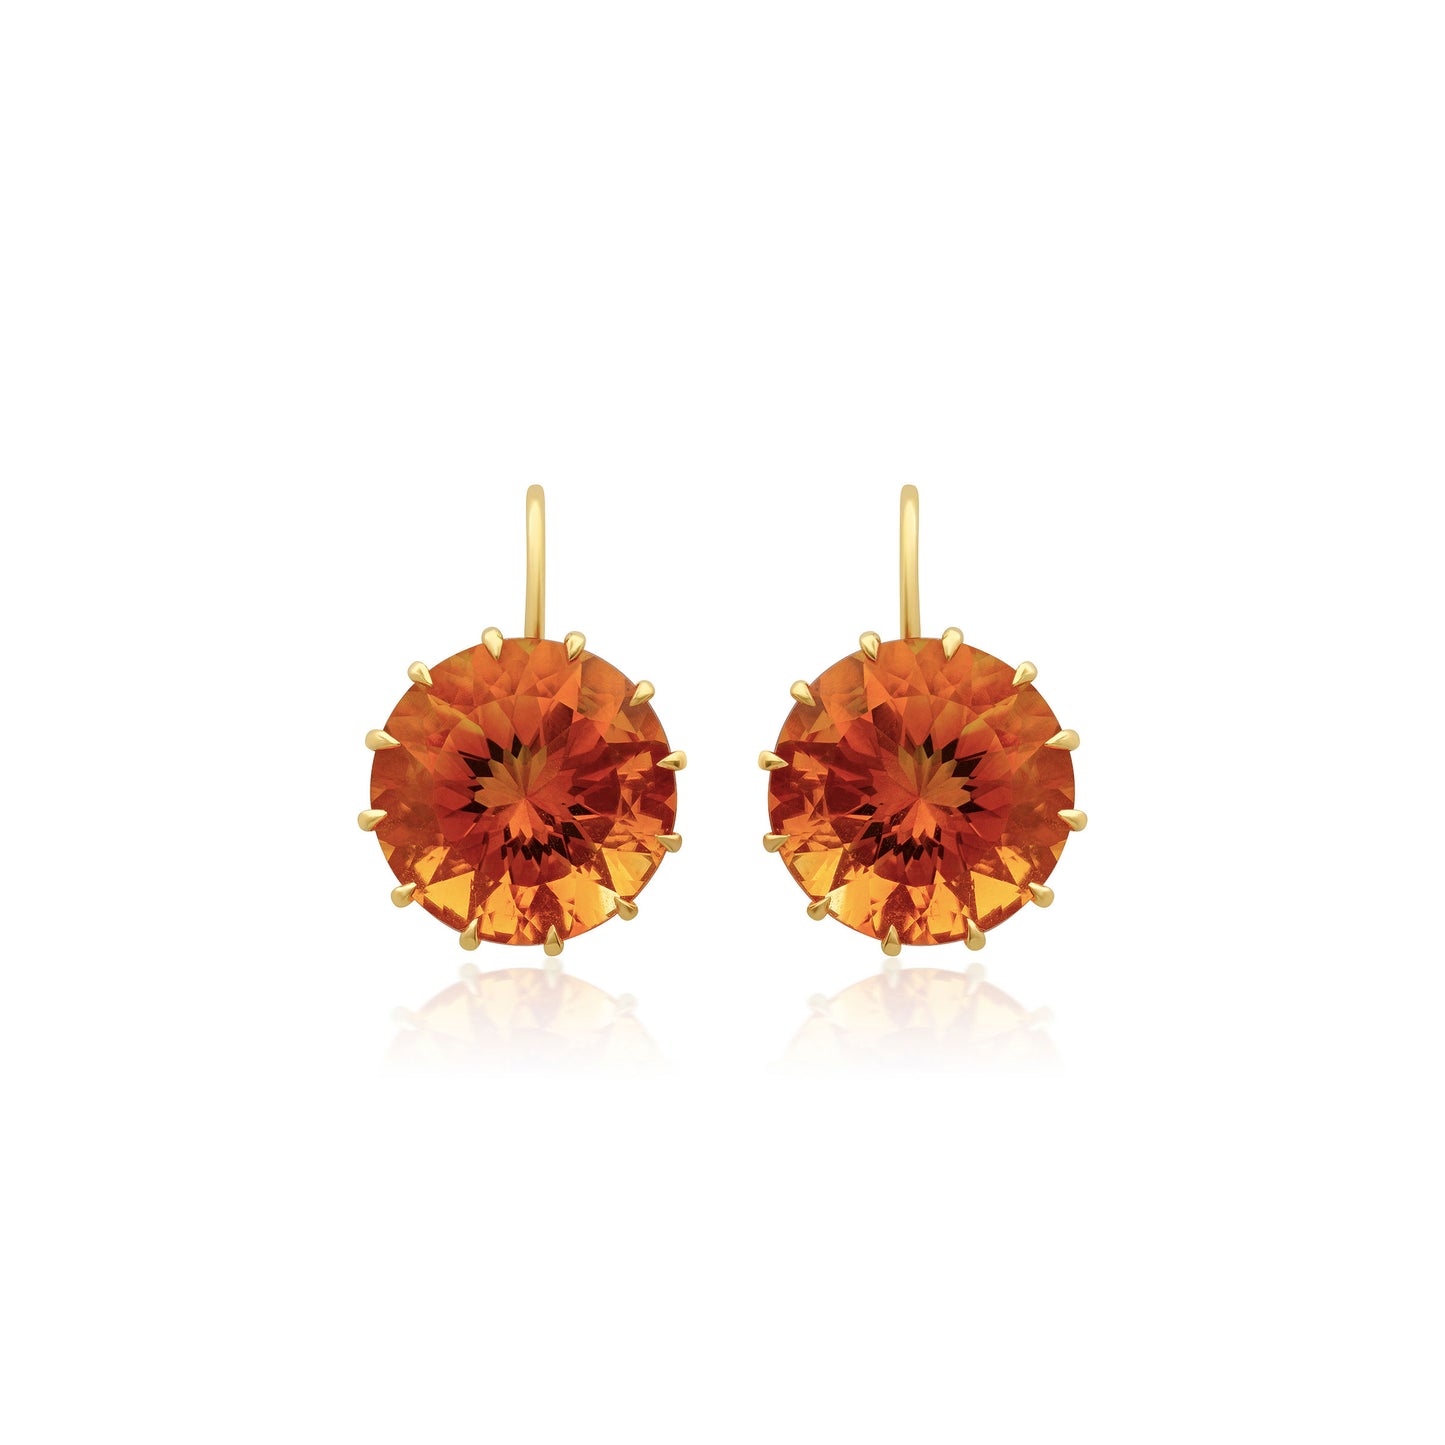 Large Round Citrine Earrings